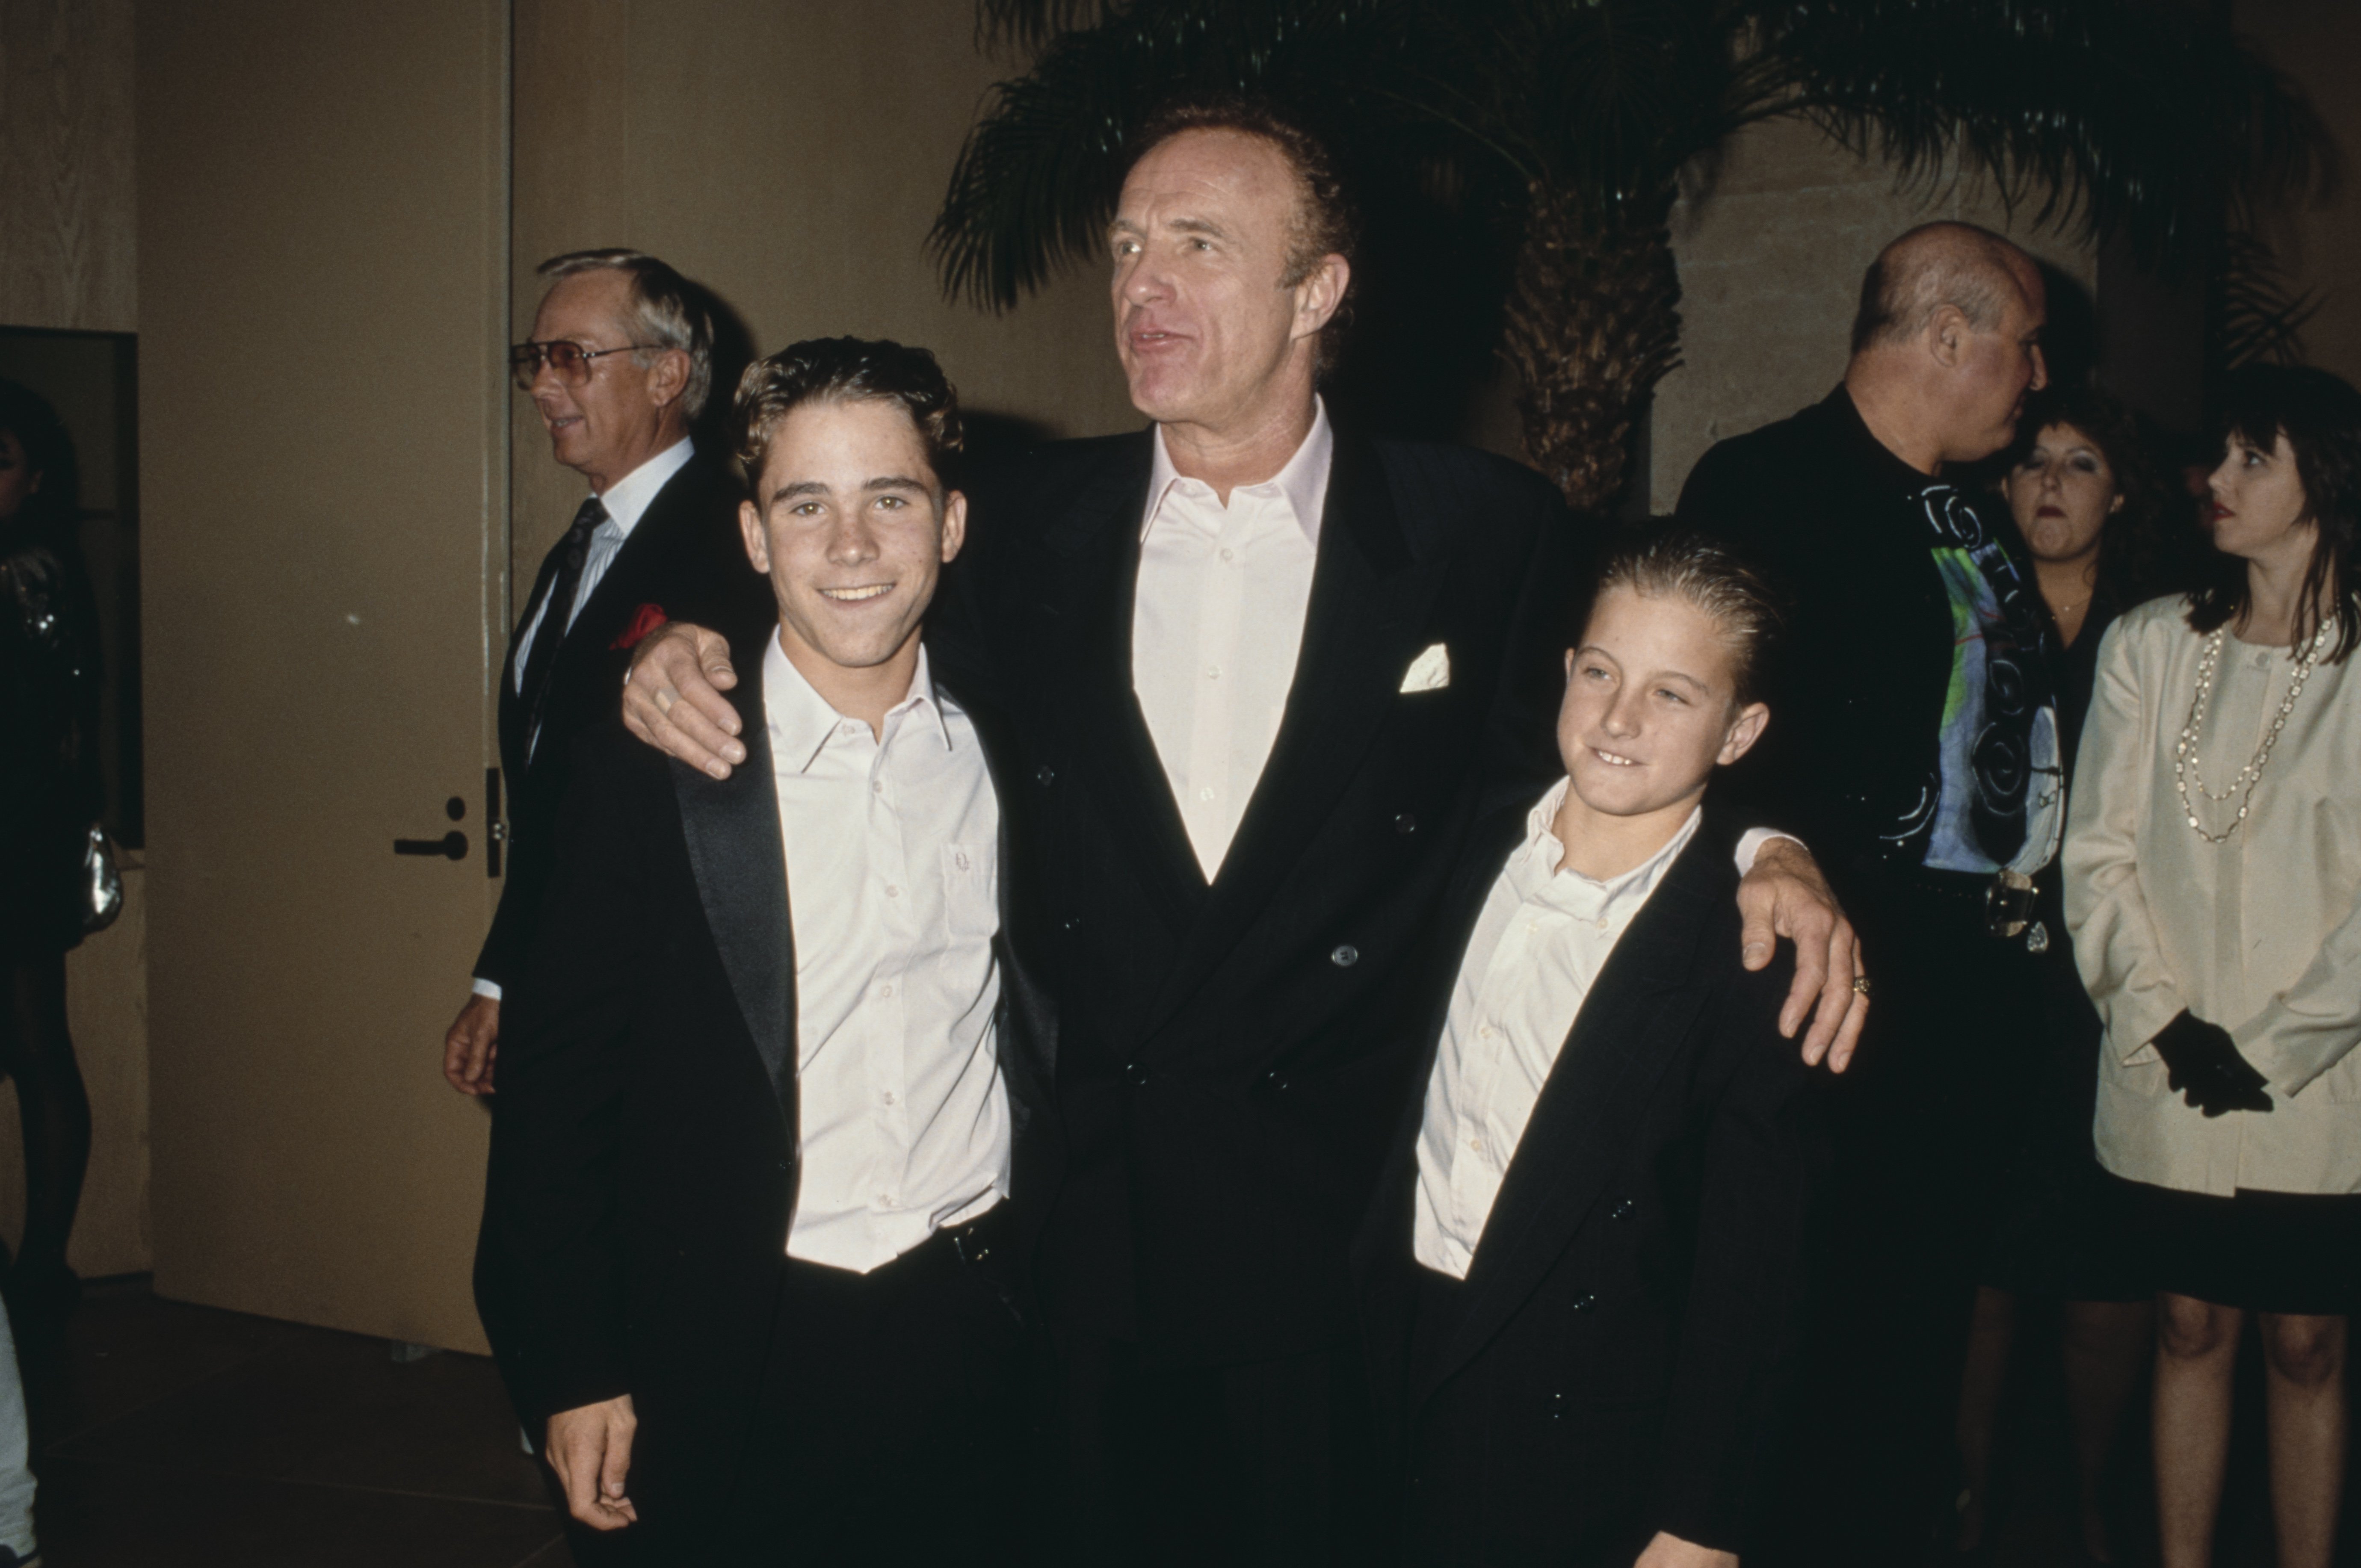 James and Scott Caan with a family member at the premiere of "Misery" in Westwood, California, on November 29, 1990. | Source: Getty Images